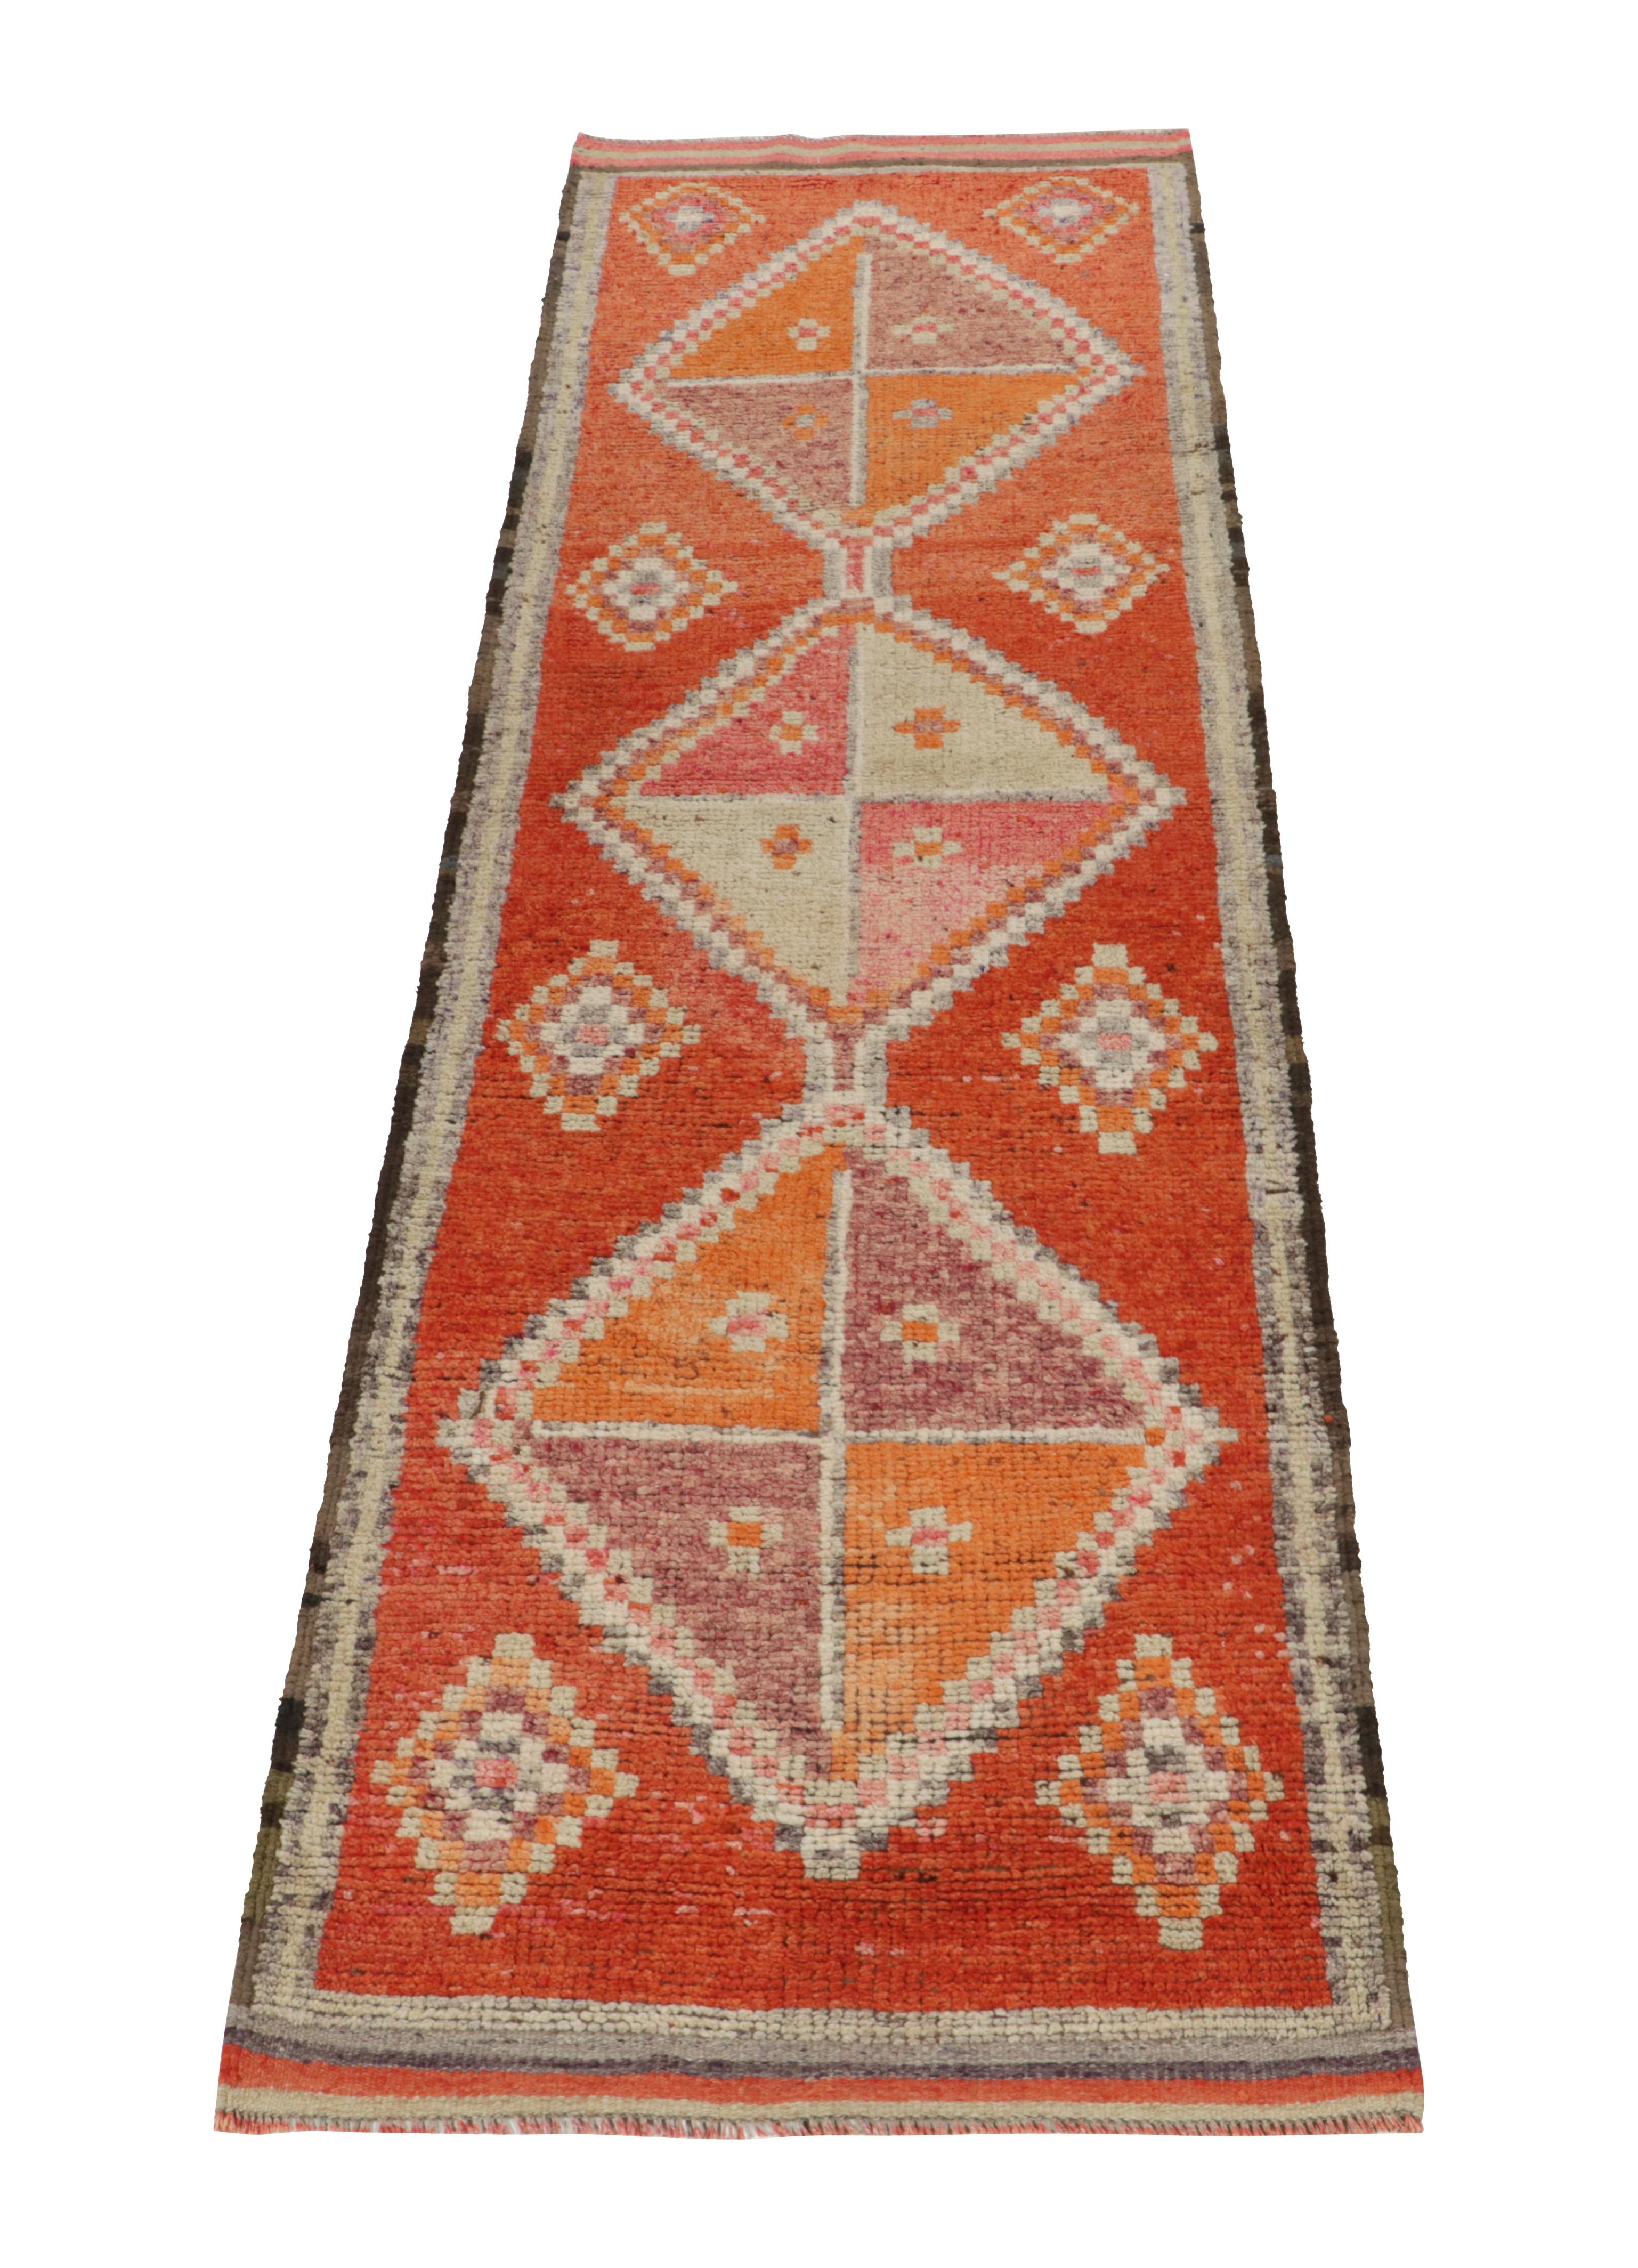 Hand-knotted in wool, a vintage 3x11 runner from Rug & Kilim’s latest bold, rare tribal rug curations. 

Originating from Turkey circa 1950-1960, the drawing highlights the lively aspect of tribal aesthetics through playful tones of orange, red